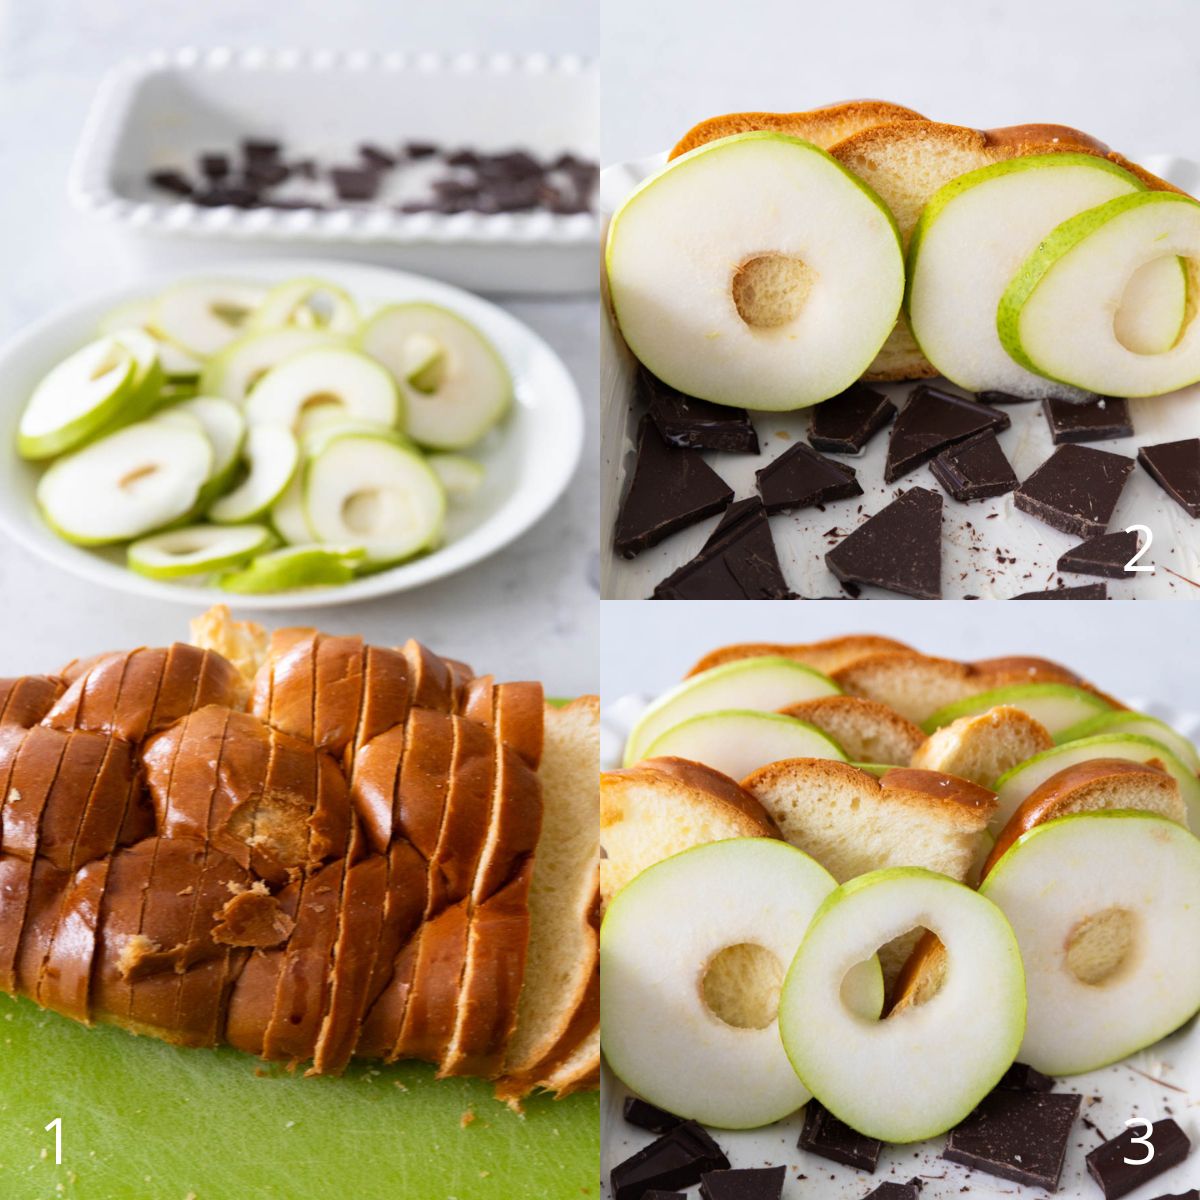 The photo collage shows how to set up the assembly line and layer the sliced pears and bread.